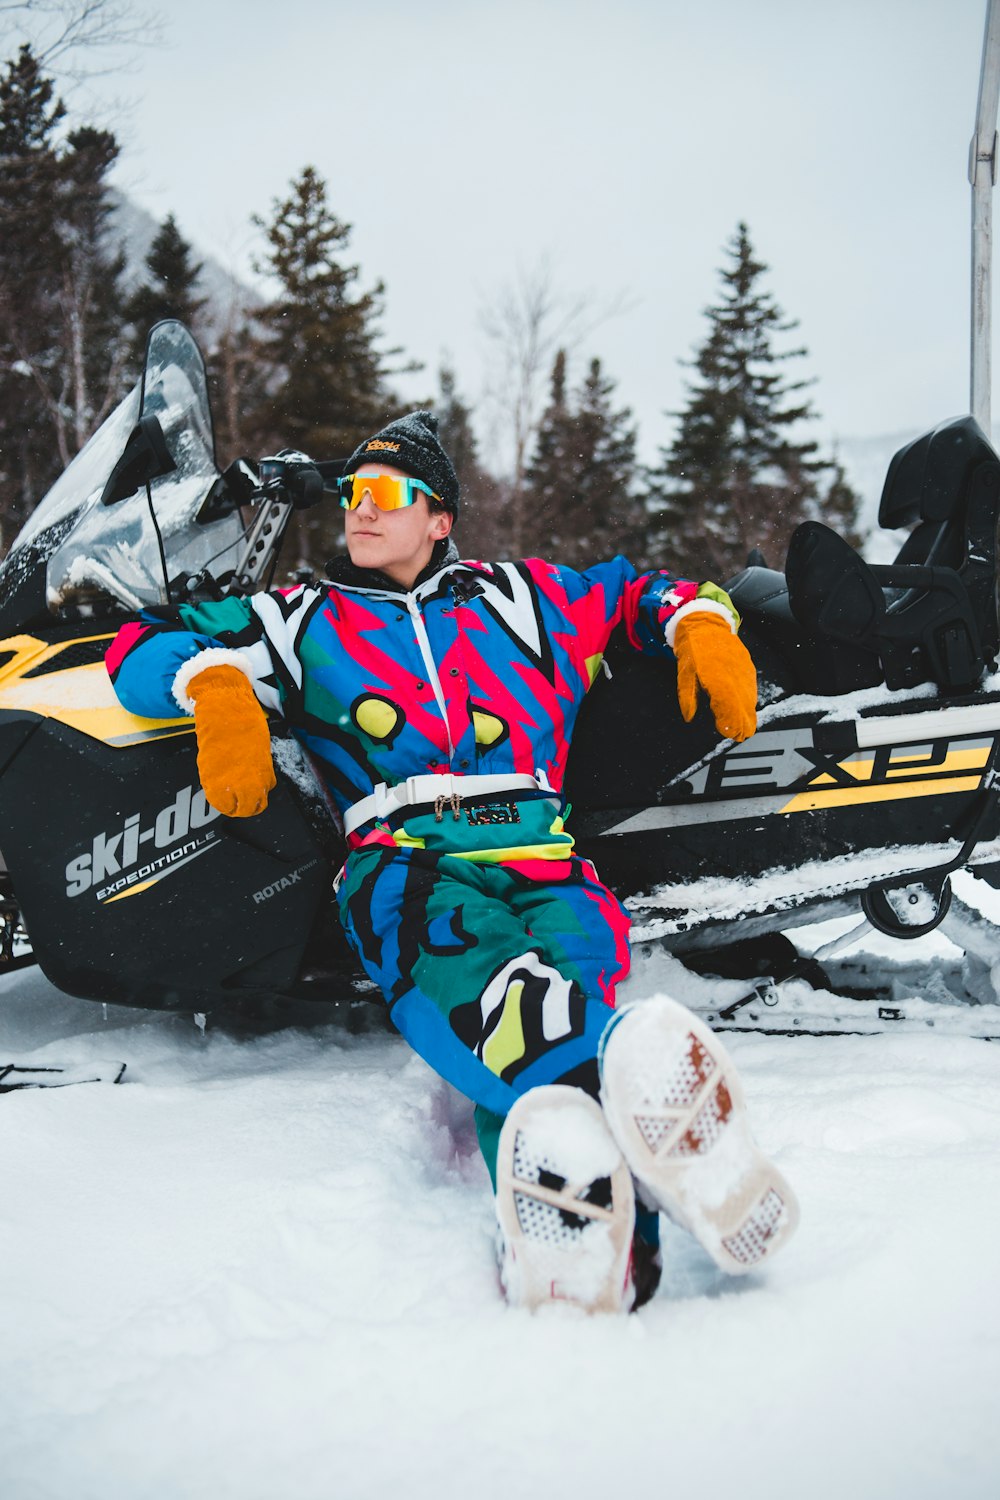 man in blue and yellow jacket riding on black and red snow sled